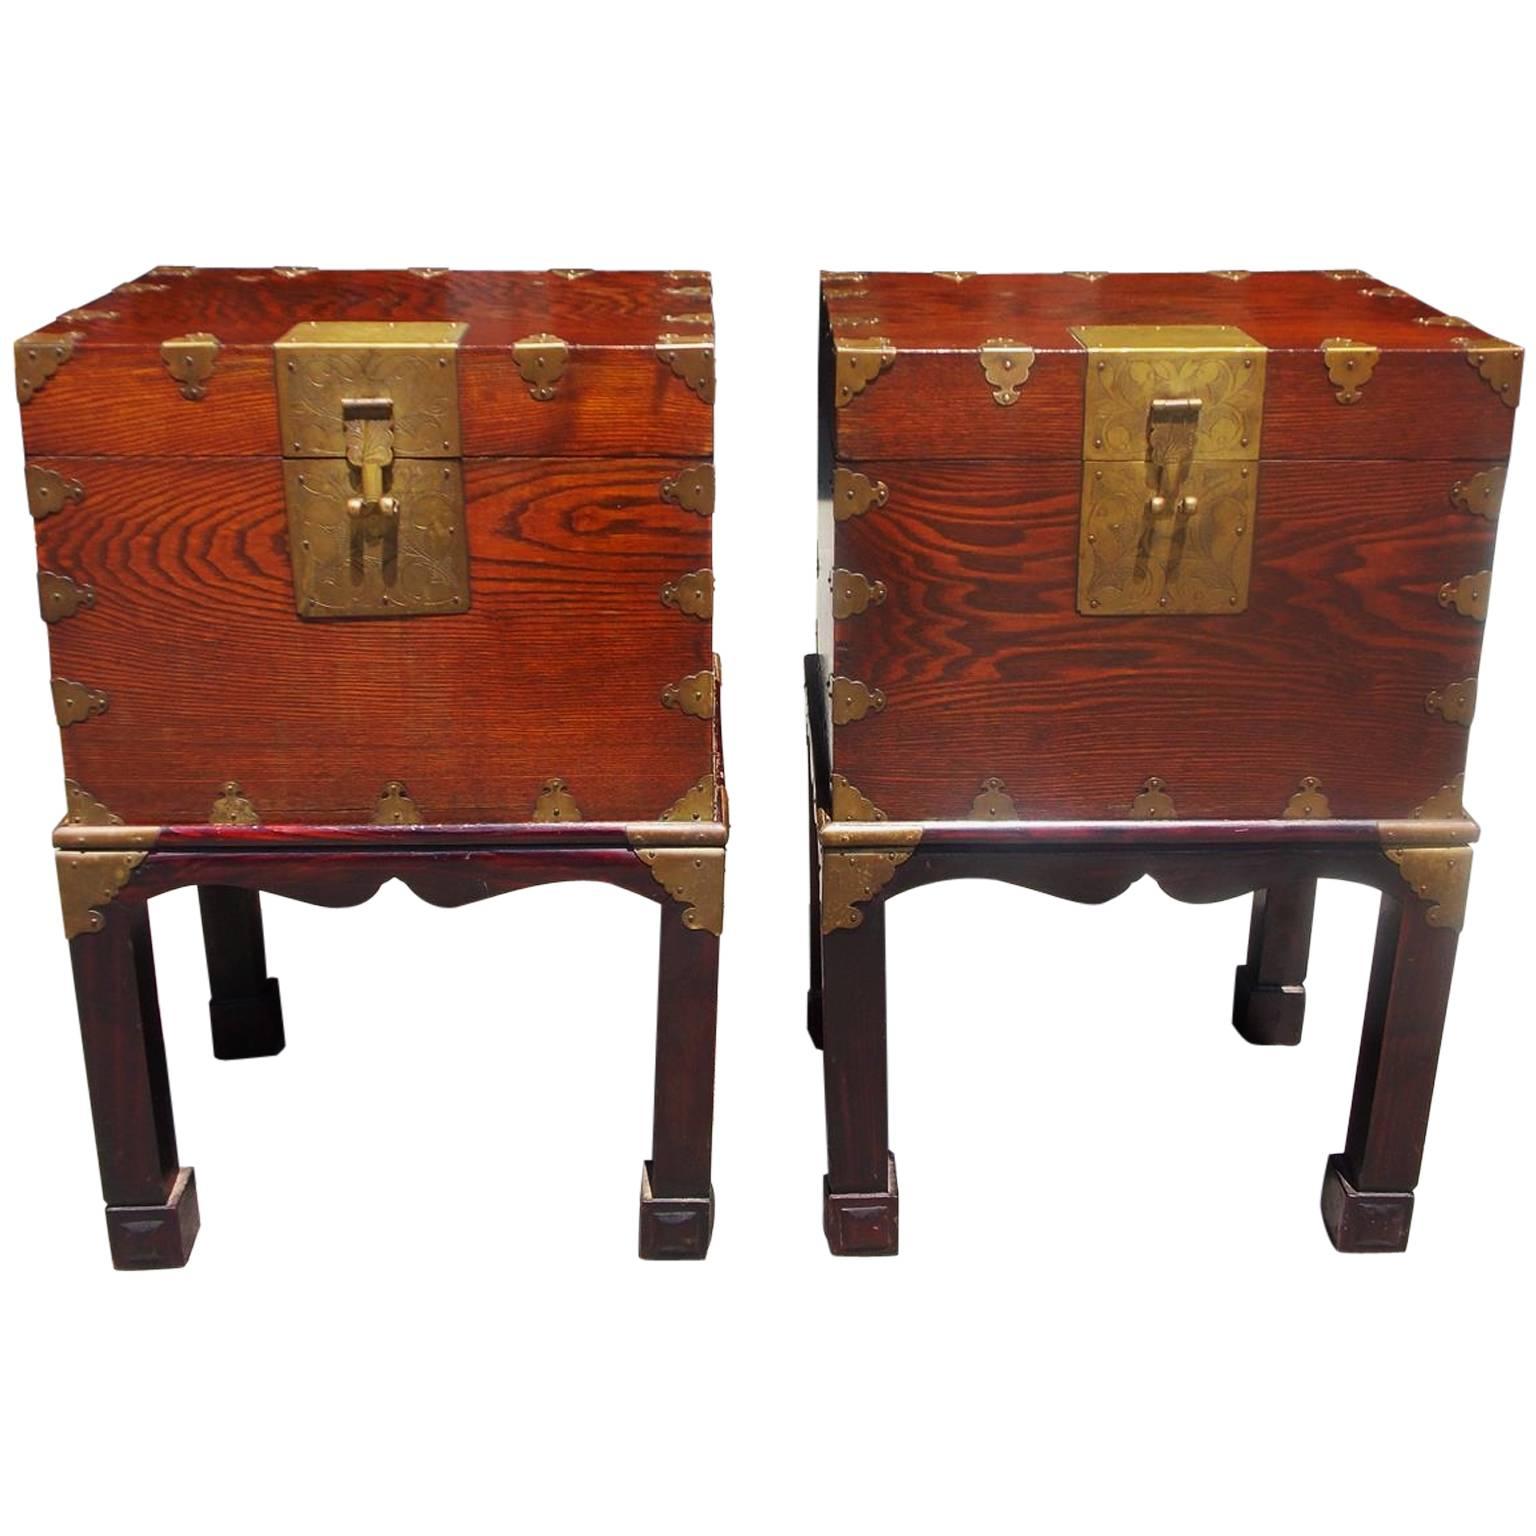 Pair of Chinese Brass-Mounted Document Boxes on Stand, Circa 1870